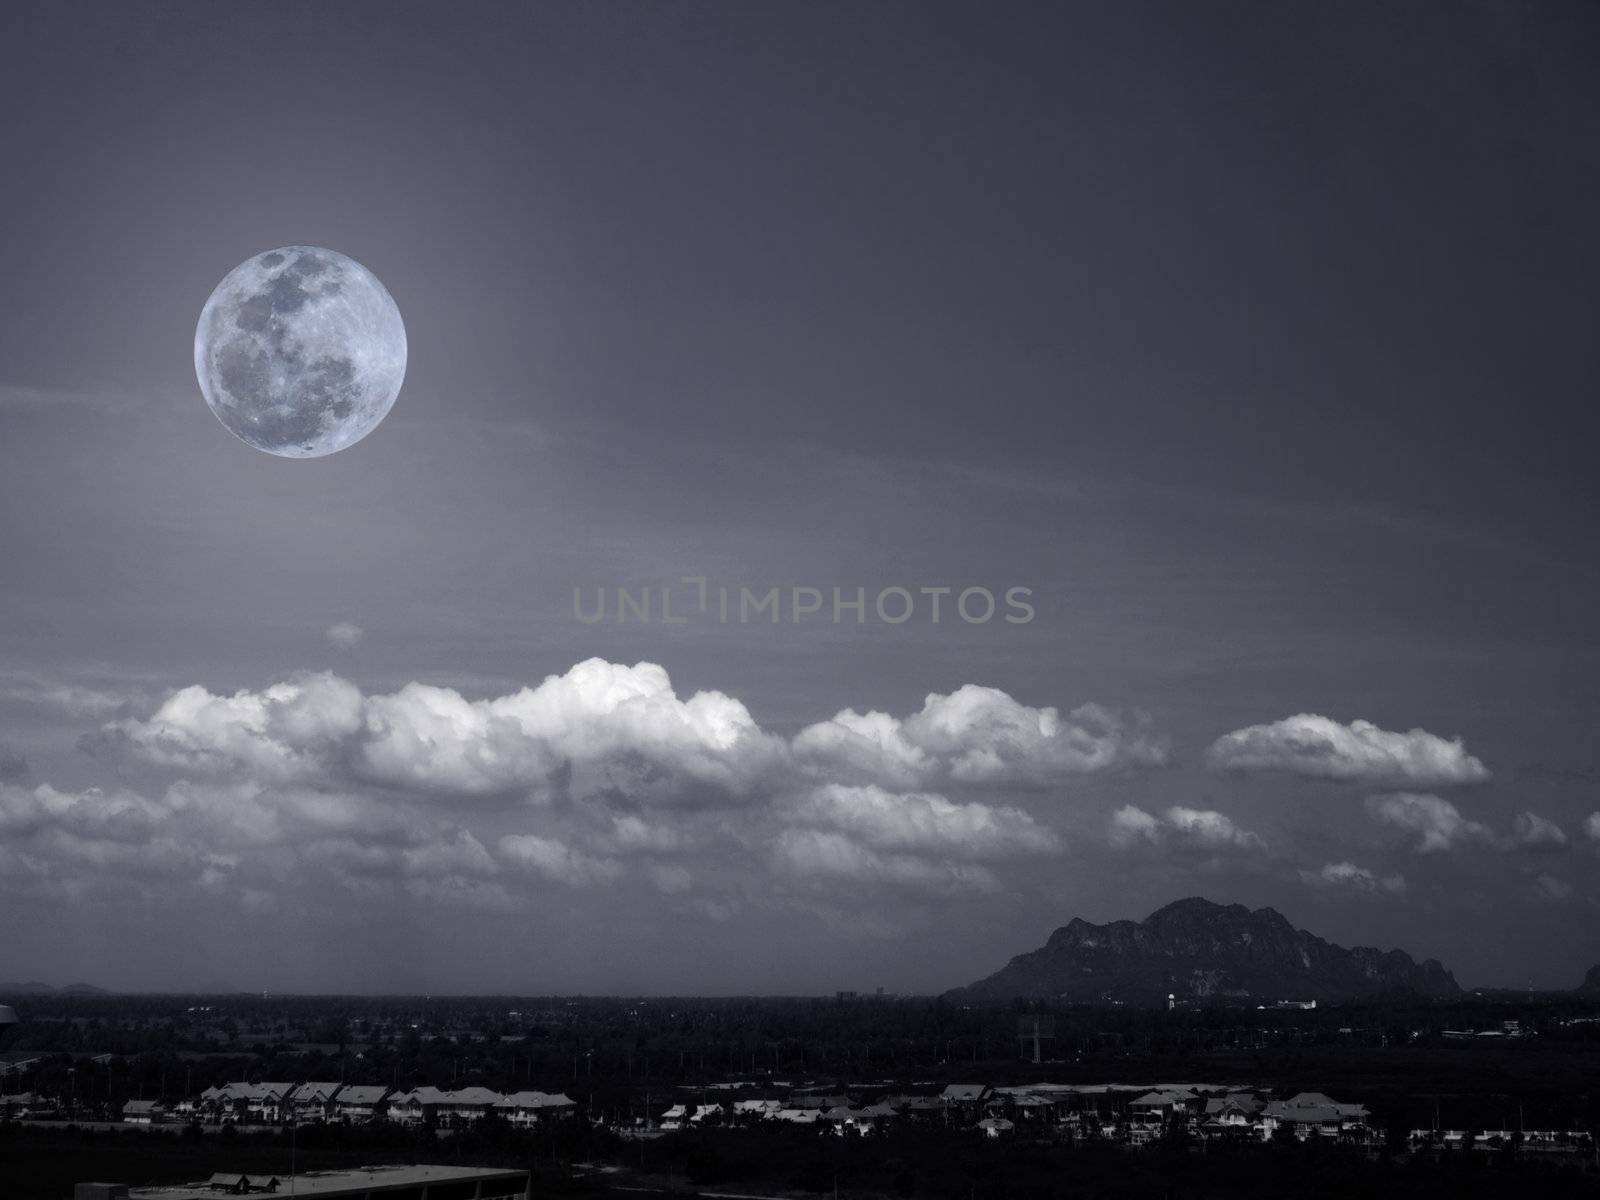 Full moon rises over the mountain and village